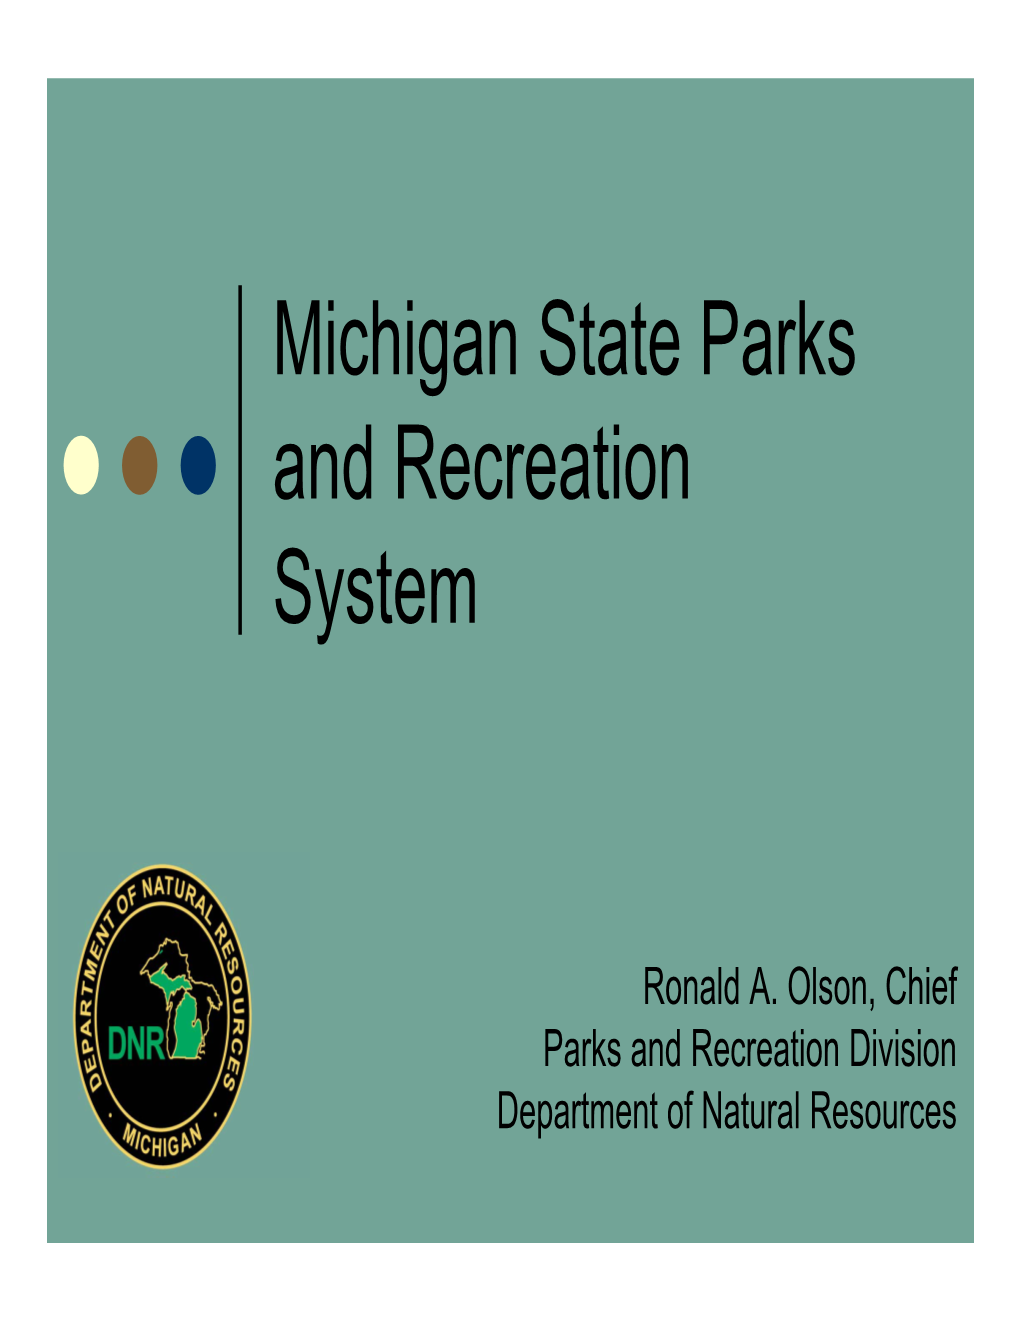 Michigan State Parks and Recreation System